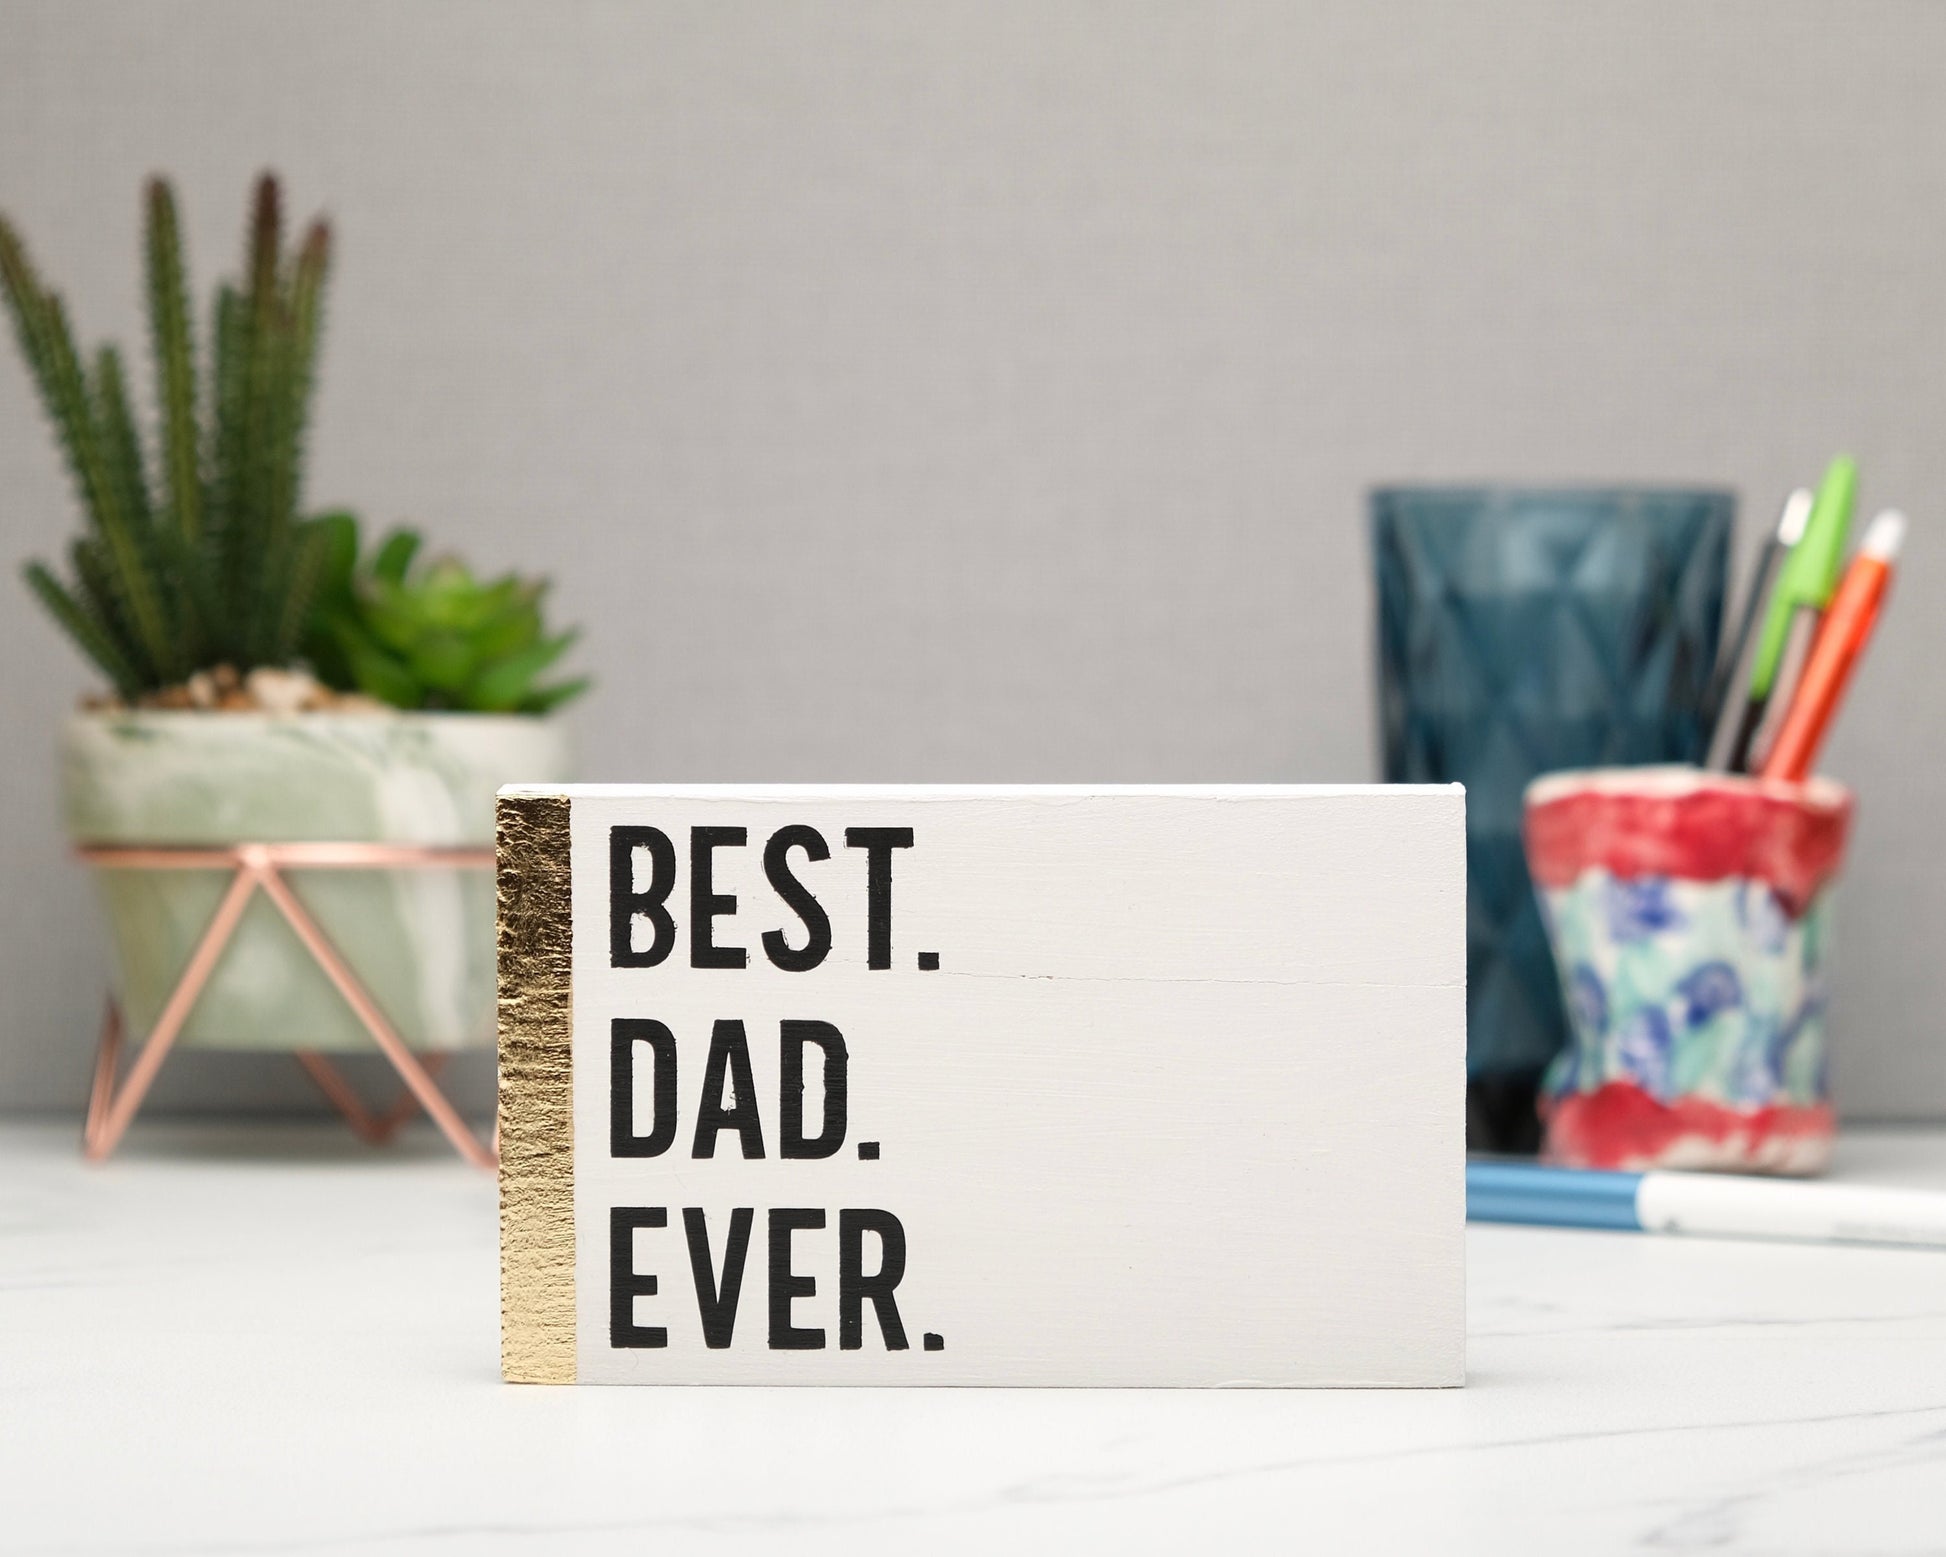 Best Dad Ever, Best Grandad Ever, personalized wood block sign, inspirational quote, Fathers Day, gift for him, grandfather gift, home decor